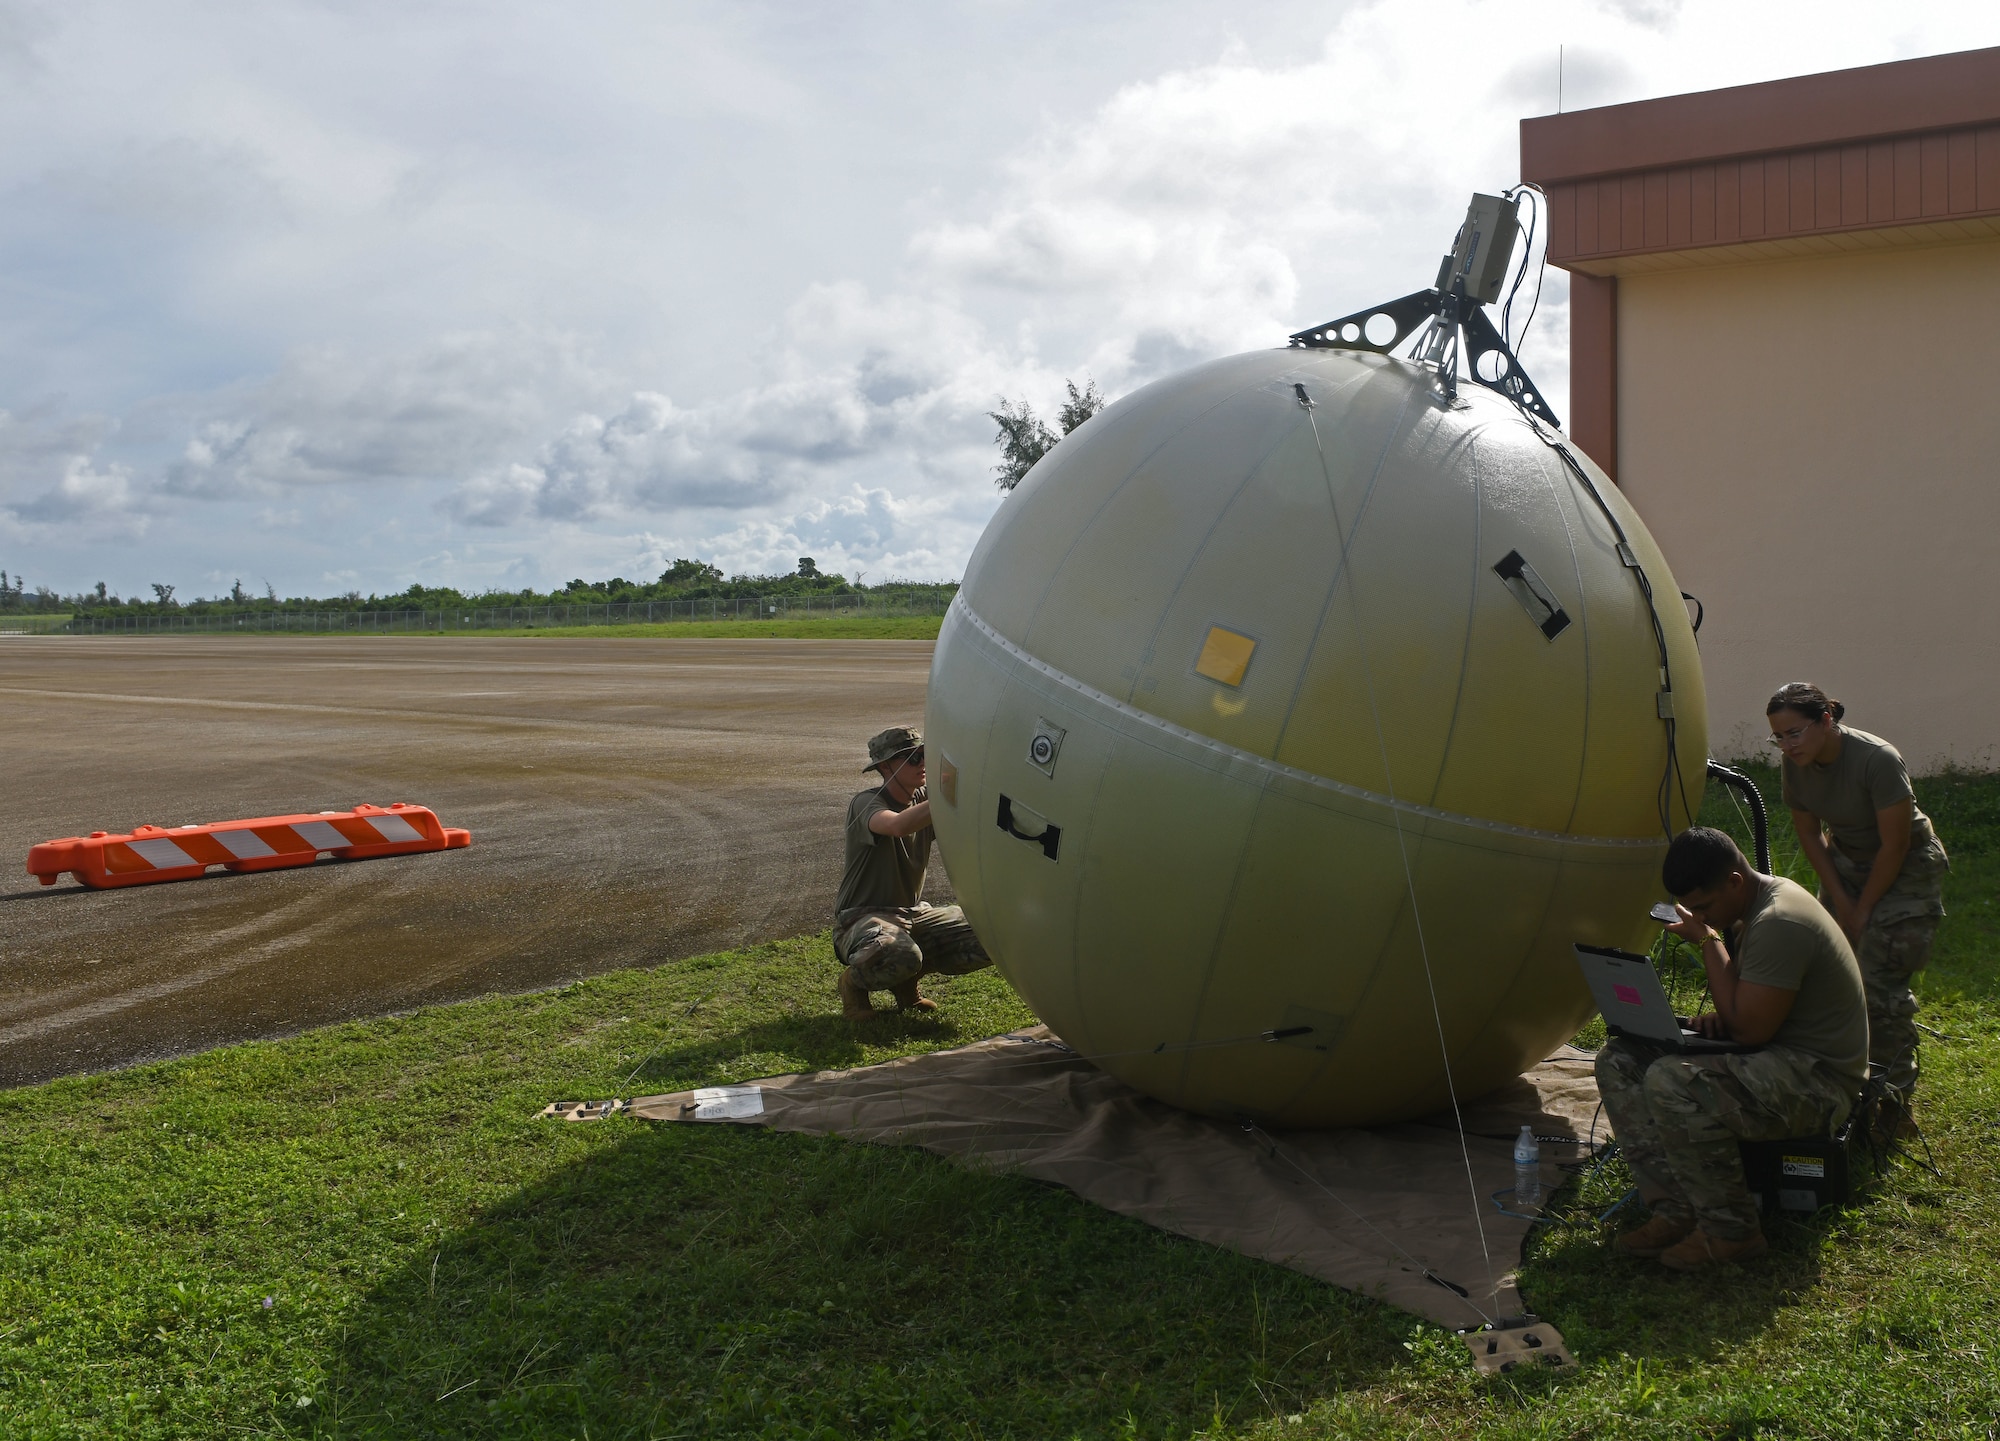 Servicemembers from the 644th Combat Communications Squadron, Andersen Air Force Base, Guam, set up network satellite communications through a Ground Antenna Transmit and Receive at Tinian International Airport, Tinian, during Pacific Iron 2021, July 26, 2021. Pacific Iron 2021 is a Pacific Air Forces dynamic force employment operation to project forces into USINDOPACOM’s area of responsibility in support of the 2018 National Defense Strategy which called on the military to be a more lethal, adaptive, and resilient force. (U.S. Air Force photo by Tech. Sgt. Benjamin Sutton)